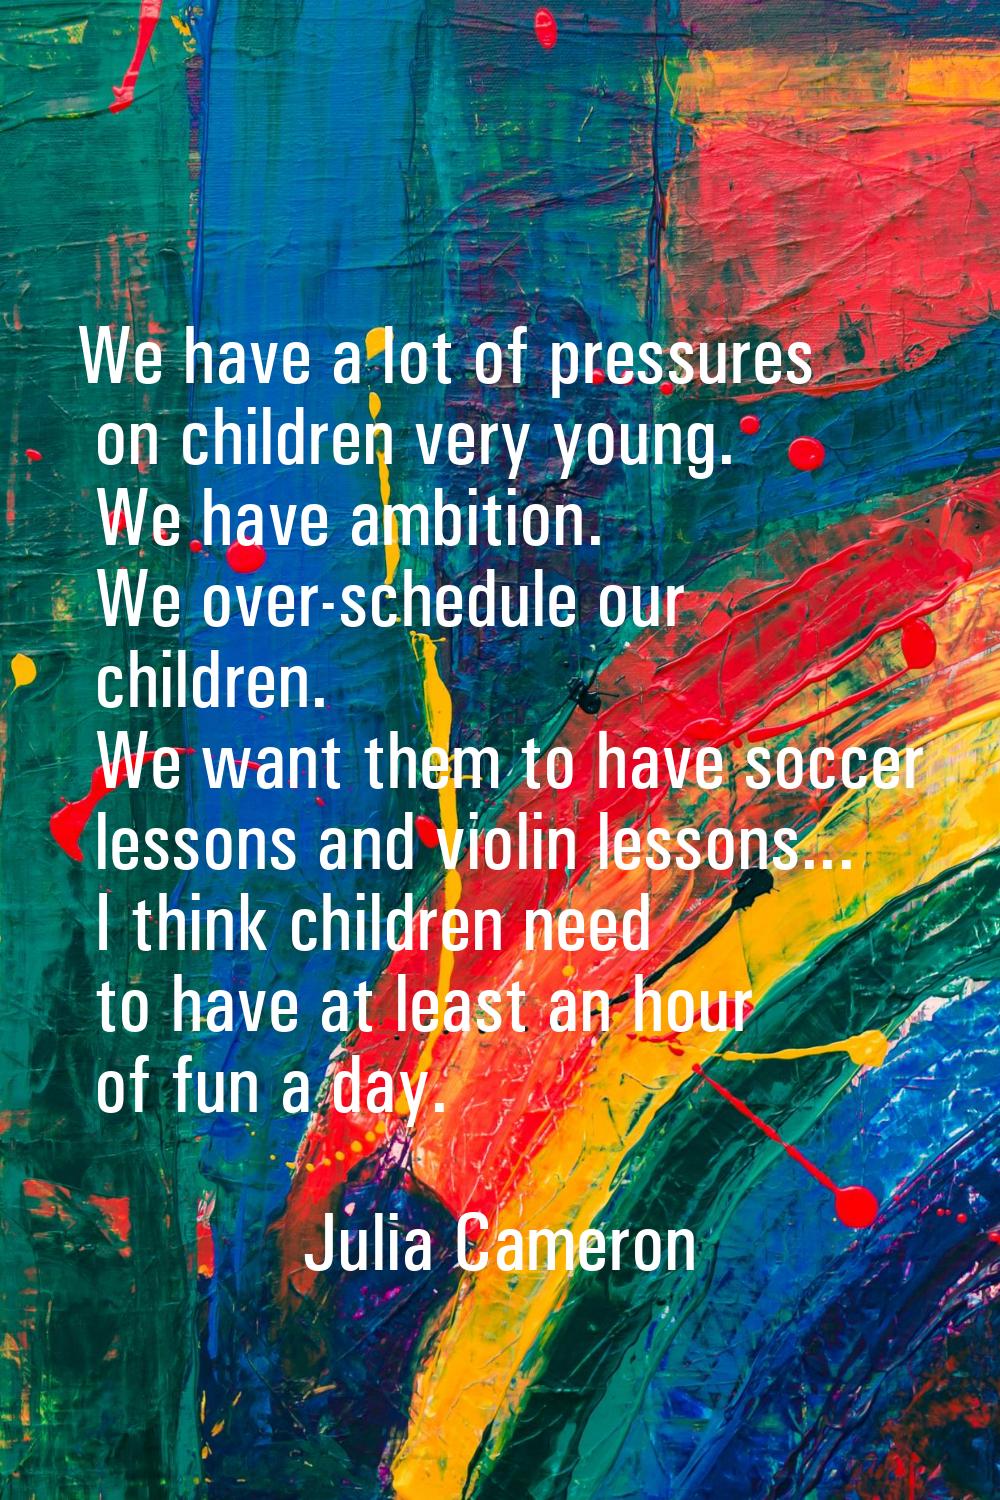 We have a lot of pressures on children very young. We have ambition. We over-schedule our children.